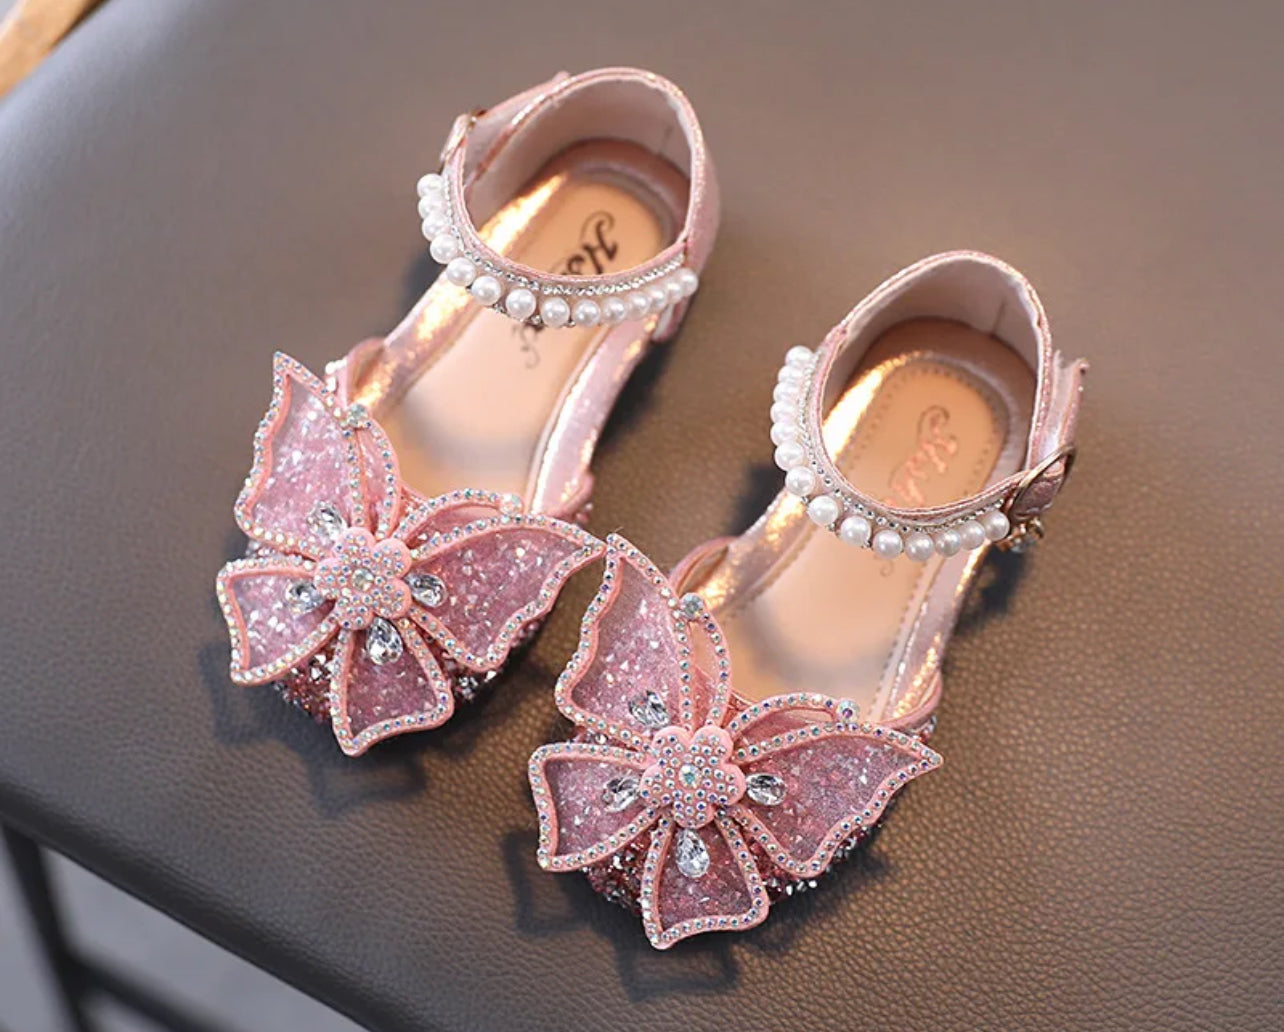 Sequins Rhinestone & Bows Girls Princess Shoes, Glam ✨ Babies Collection